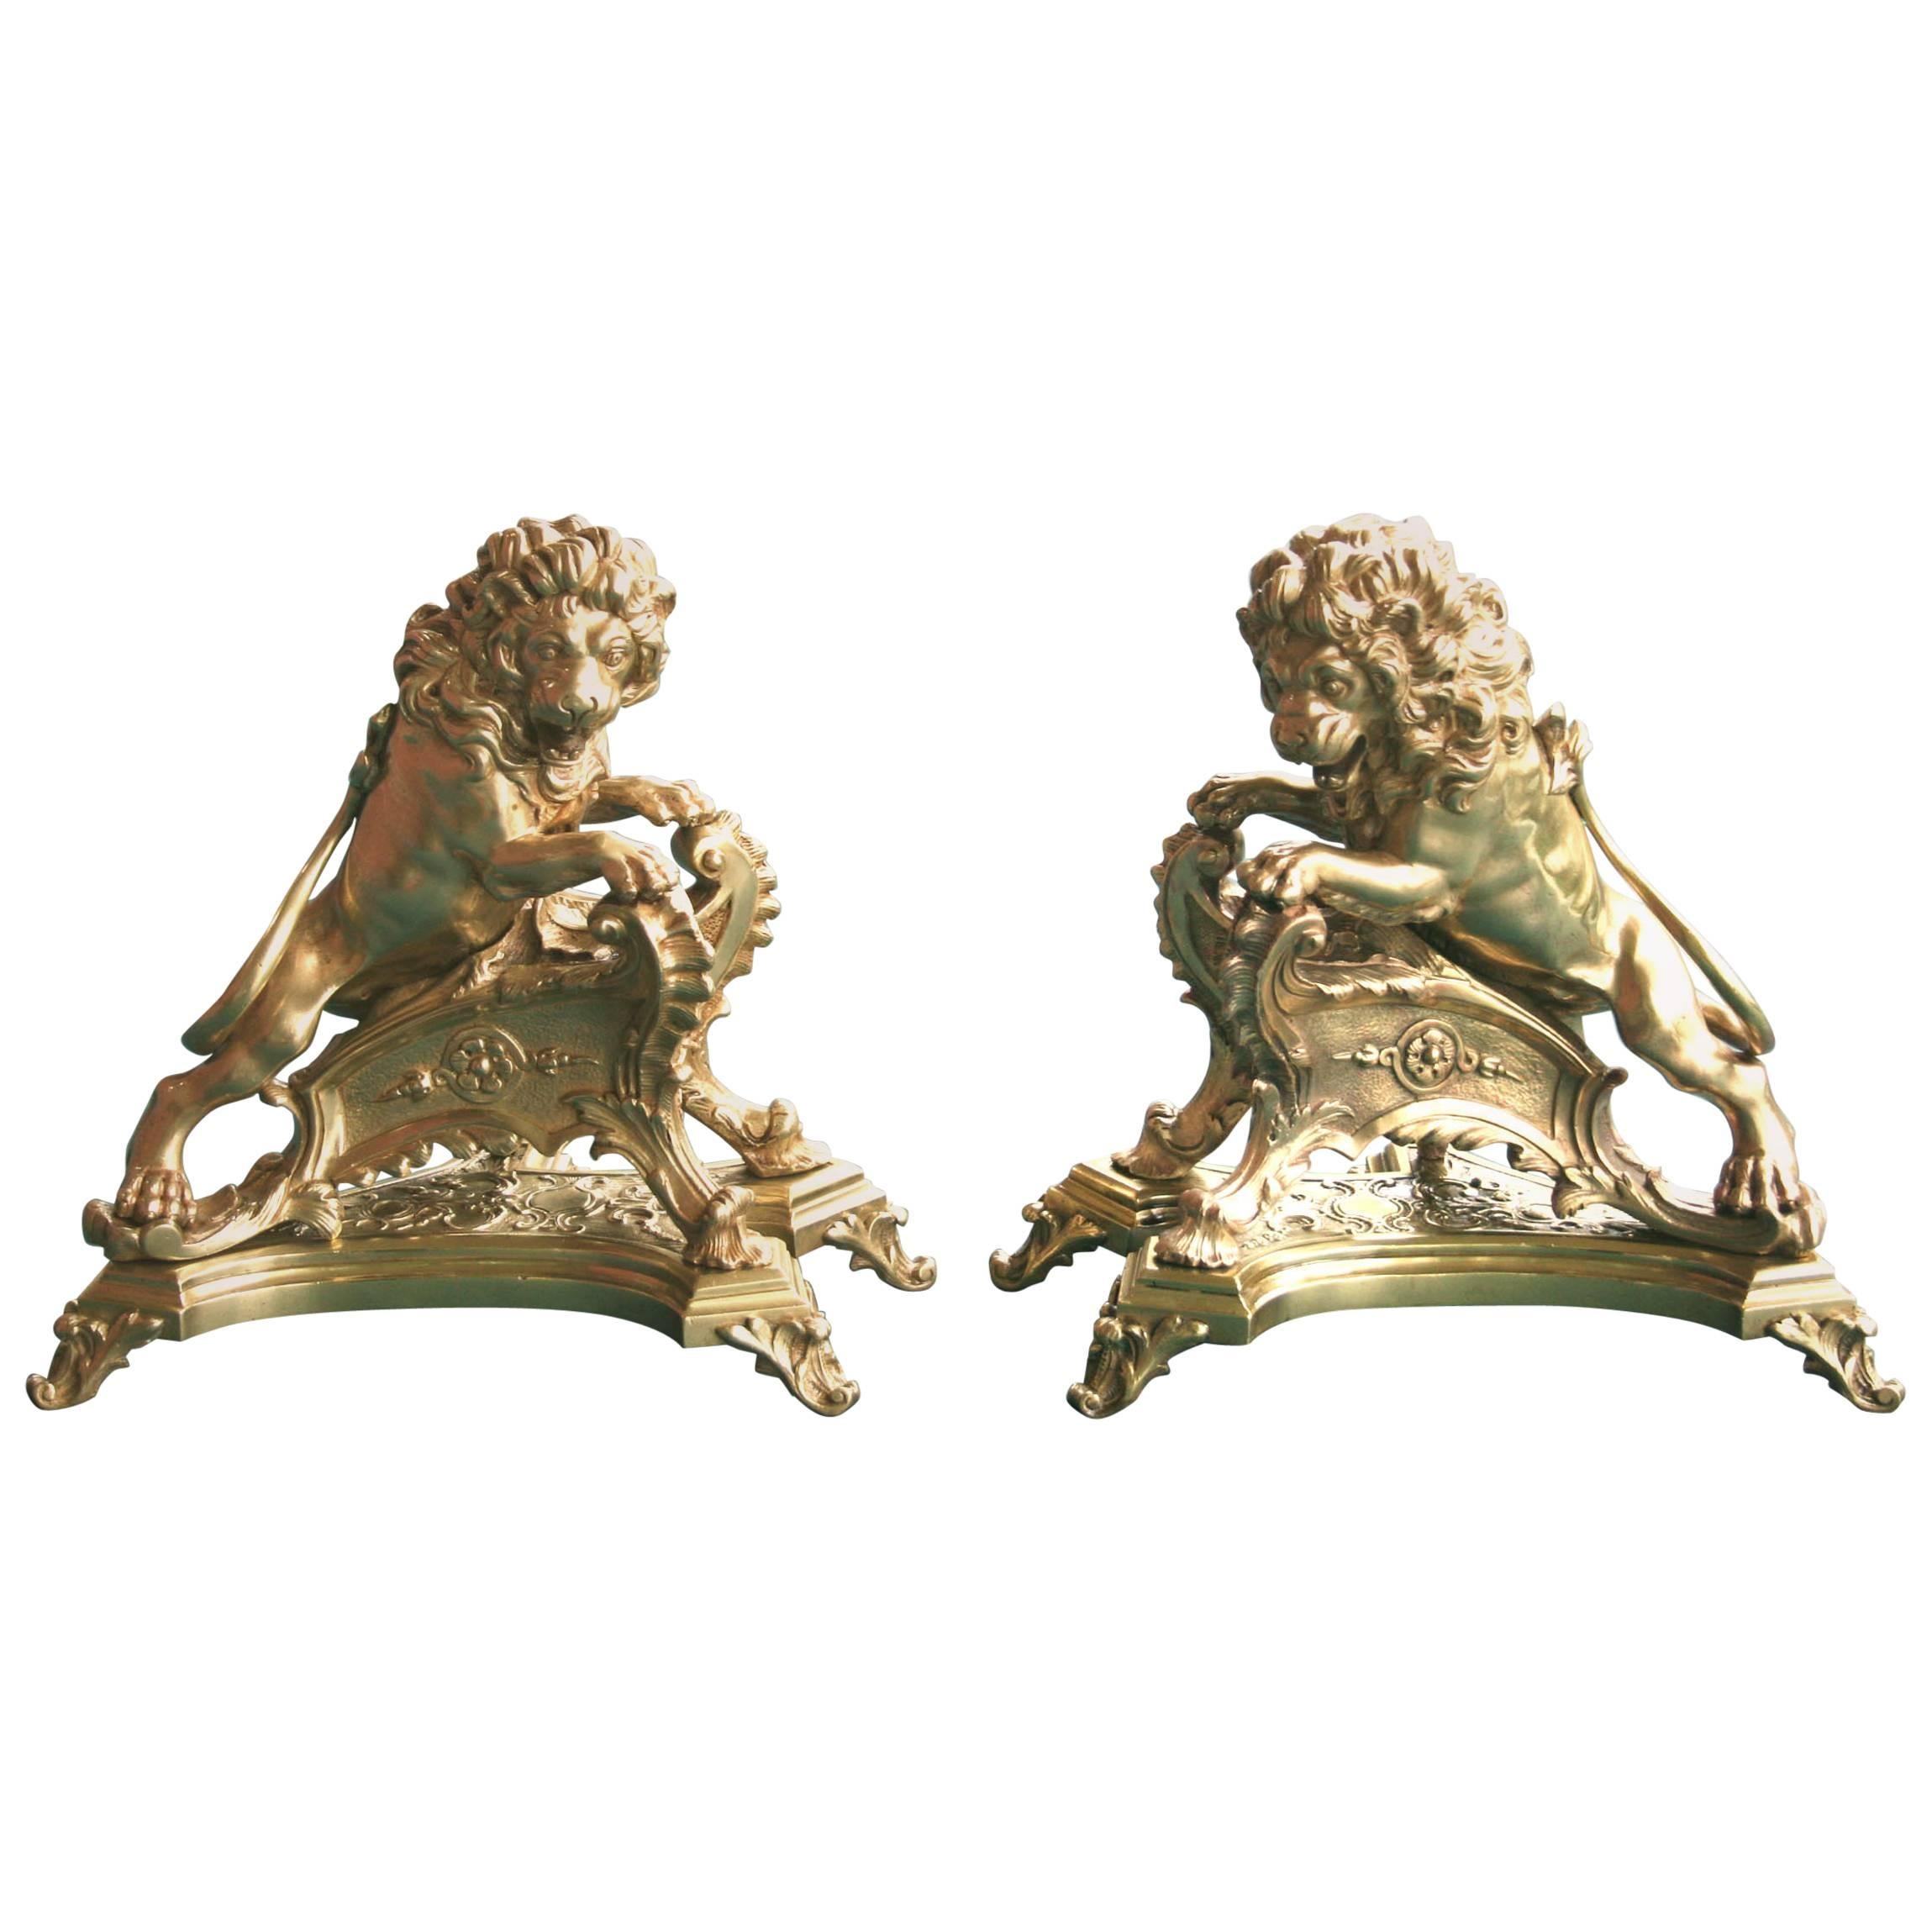 Exceptional Pair of 19th Century French Lion-Form Gilt Bronze Chenet For Sale